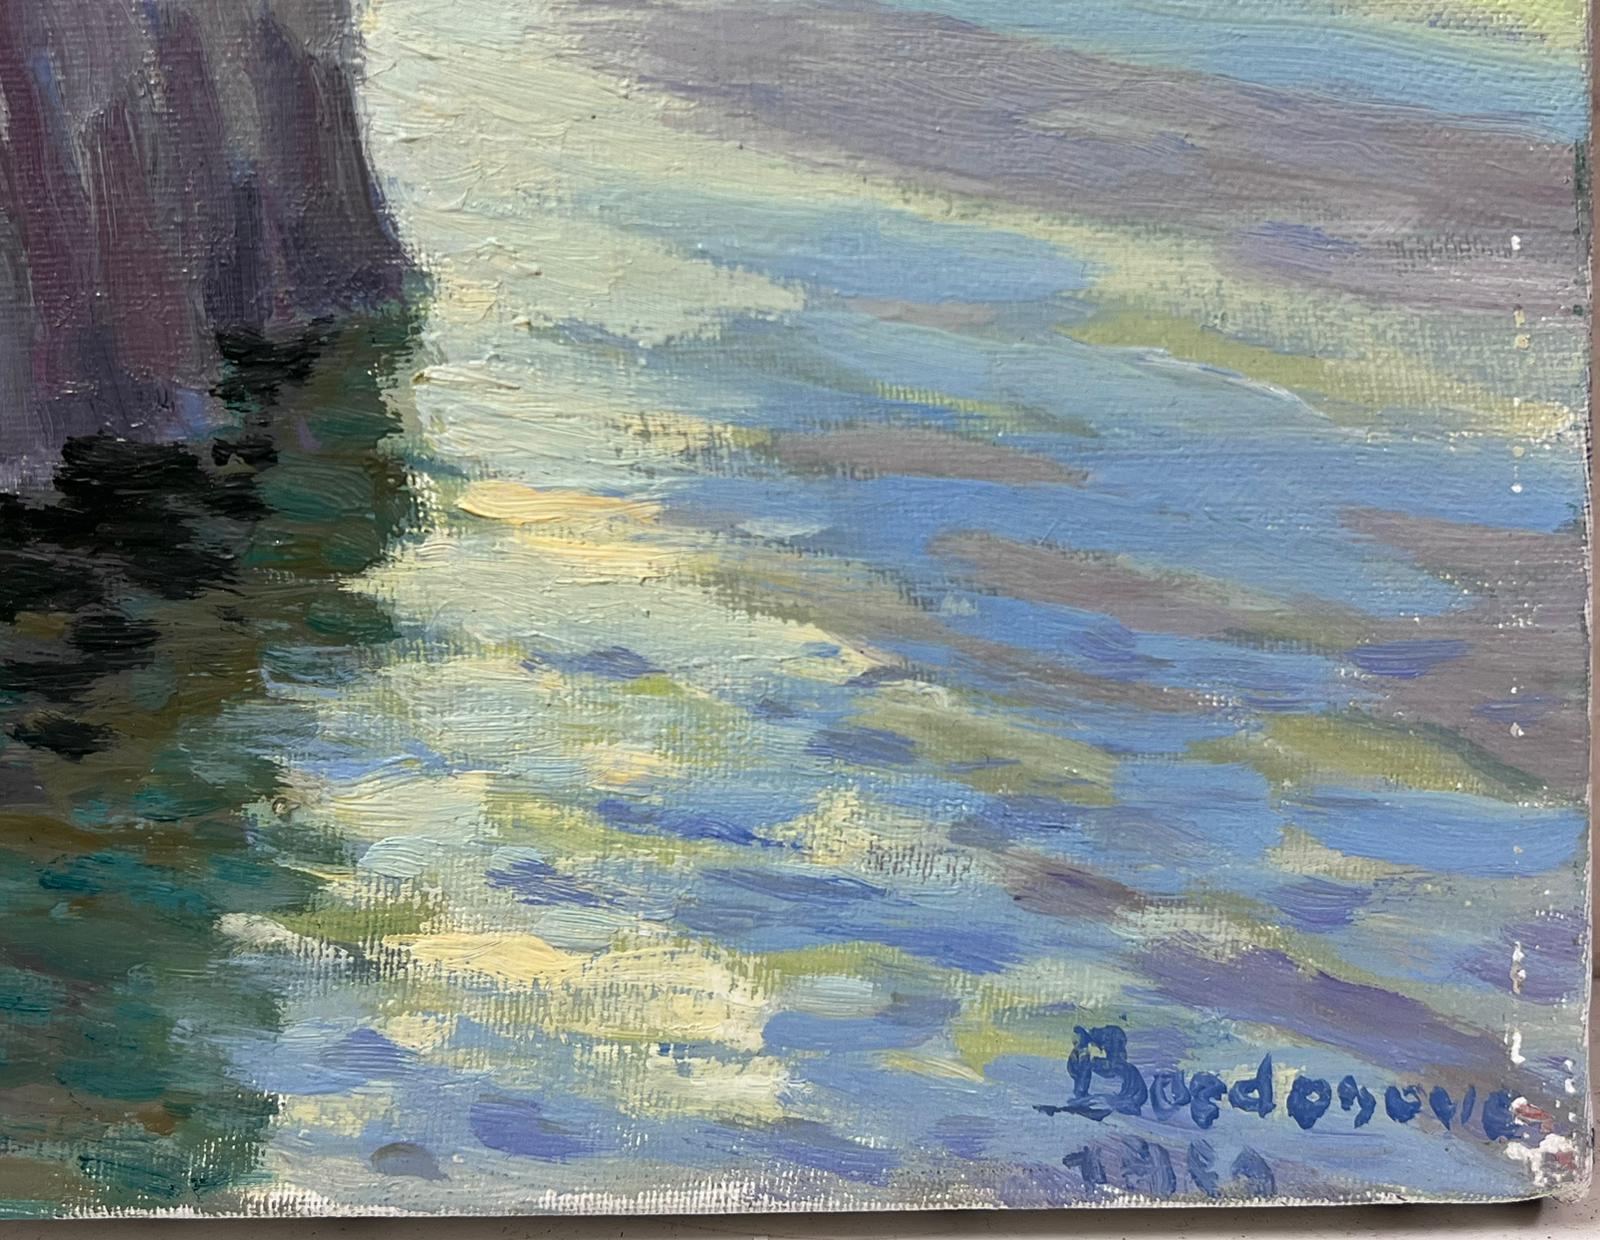 Etretat
by Georges Bordonave (French contemporary)
signed oil painting on canvas, unframed
dated 1989
canvas: 10.75 x 14 inches
condition: very good but with a few scuffs of paint loss. 
provenance: from a large private collection of this artists